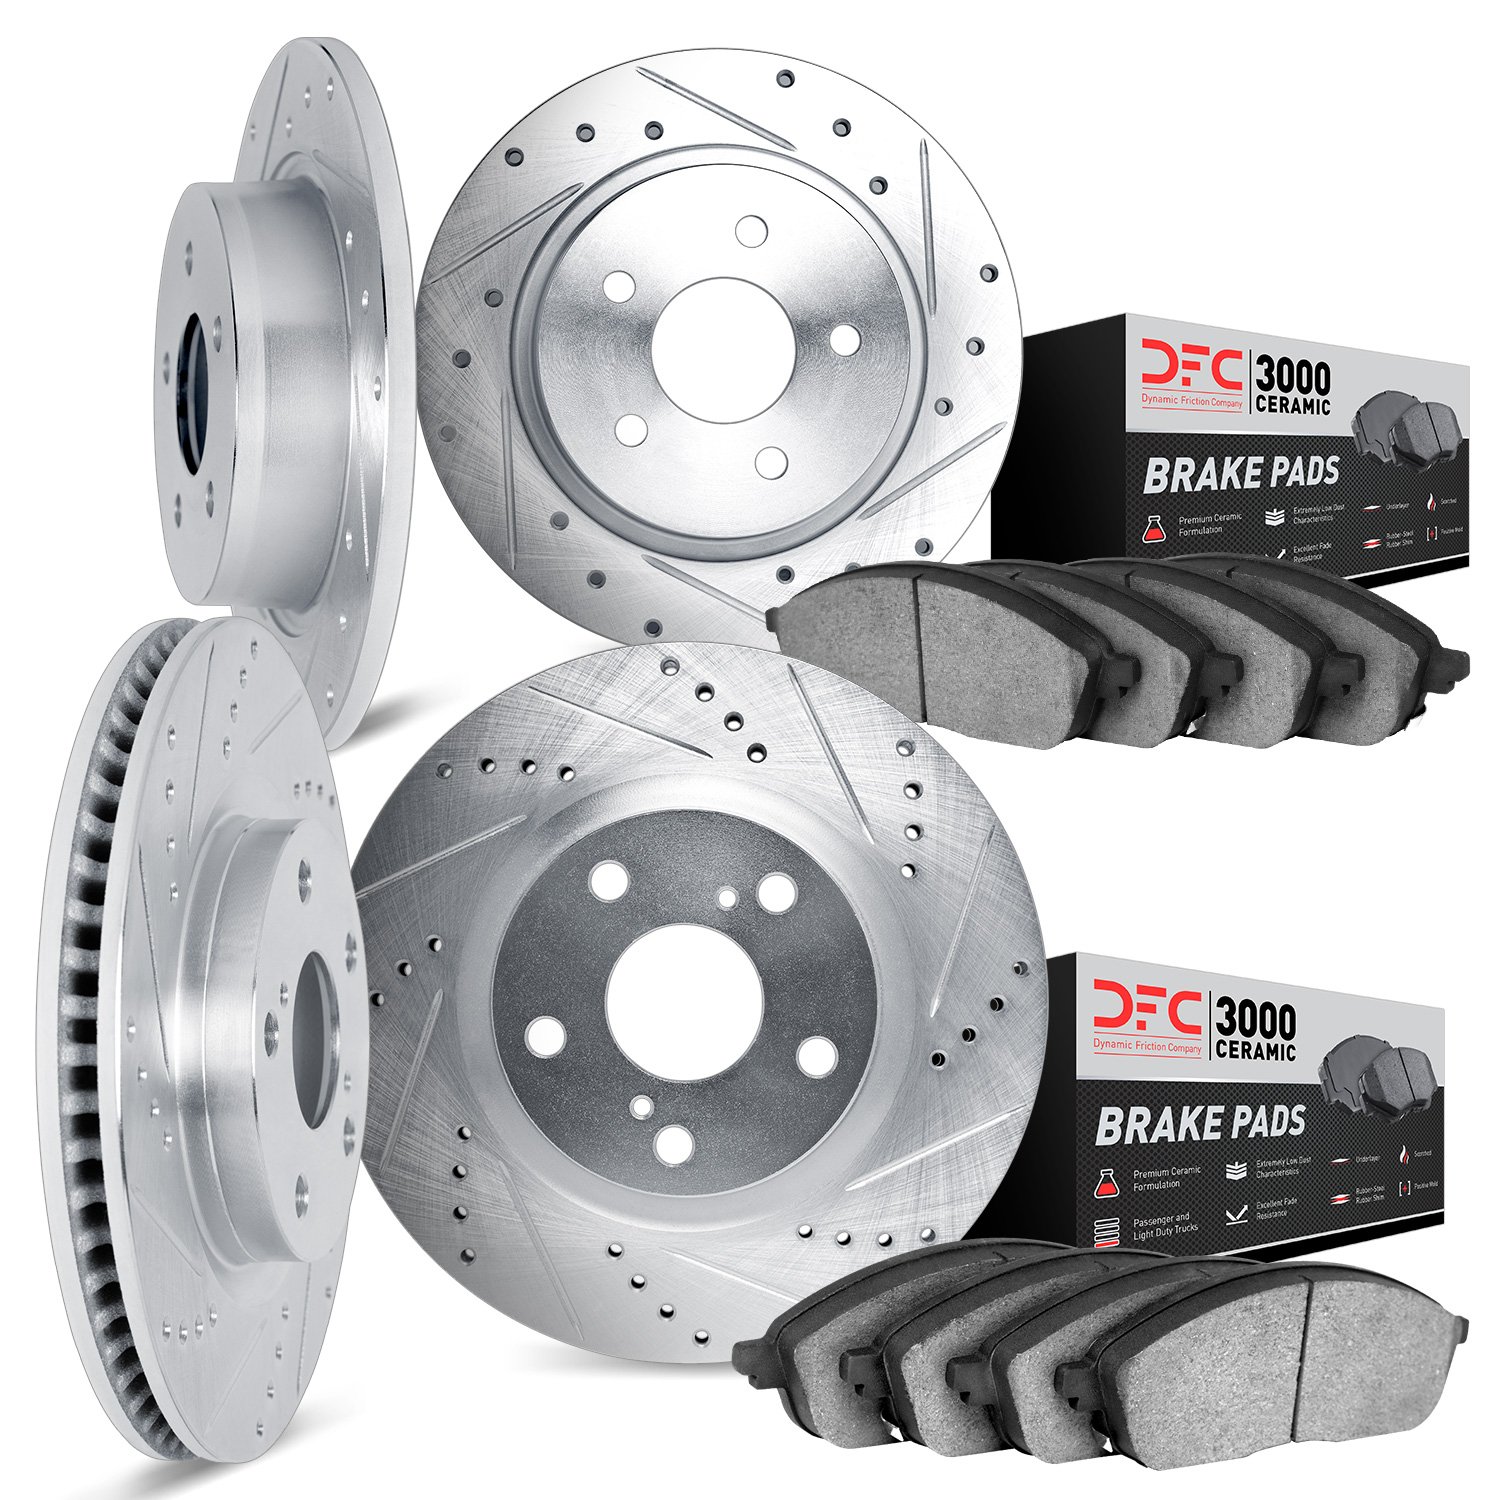 7304-54036 Drilled/Slotted Brake Rotor with 3000-Series Ceramic Brake Pads Kit [Silver], 1999-2004 Ford/Lincoln/Mercury/Mazda, P